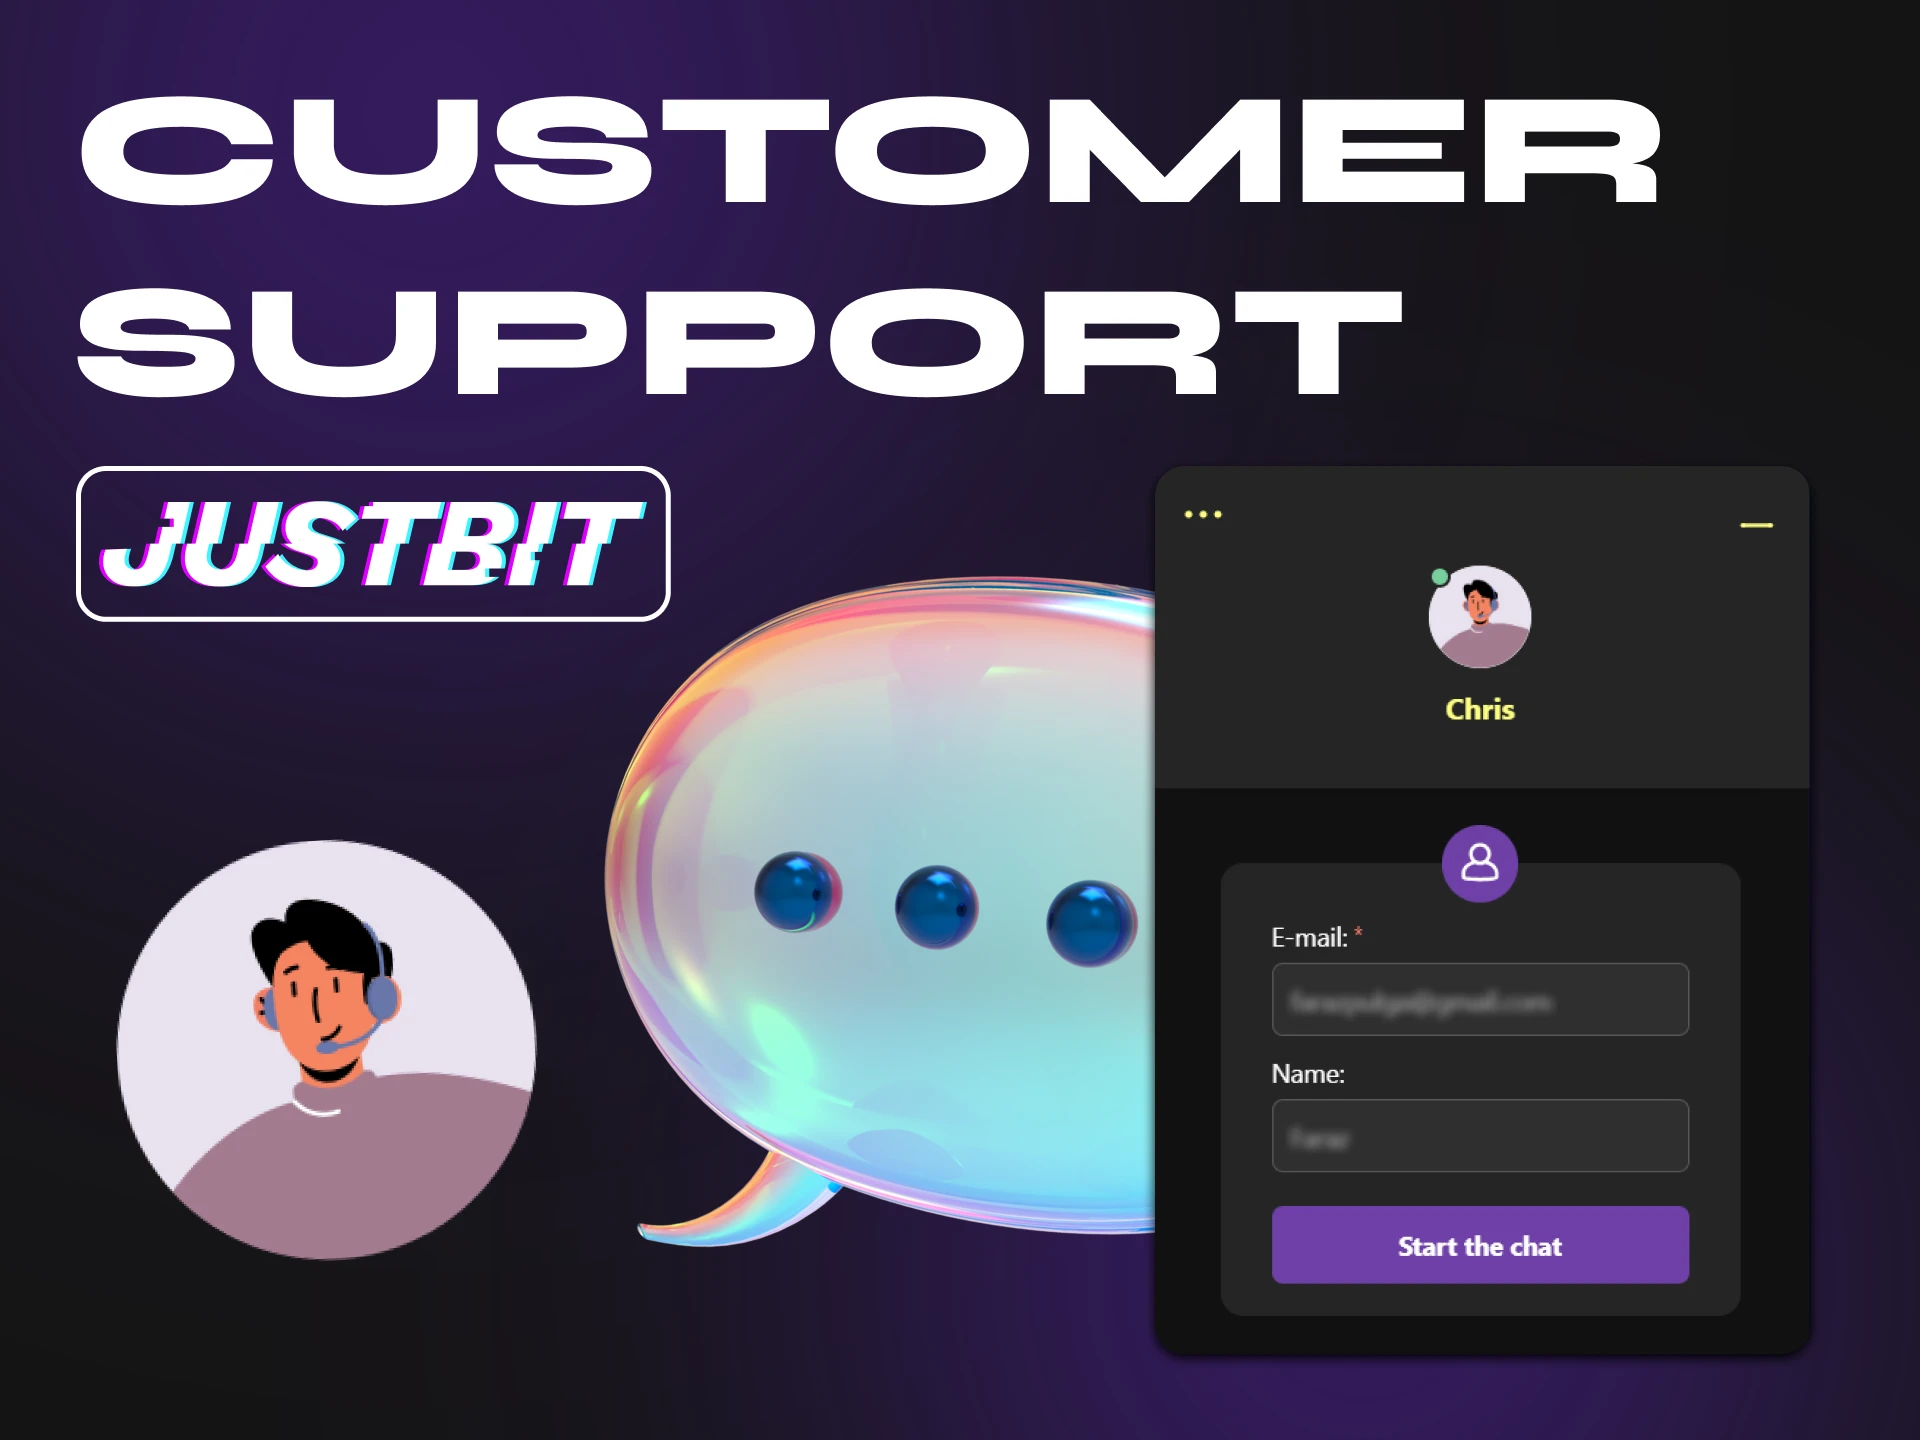 Justbit Casino has many ways to contact support.